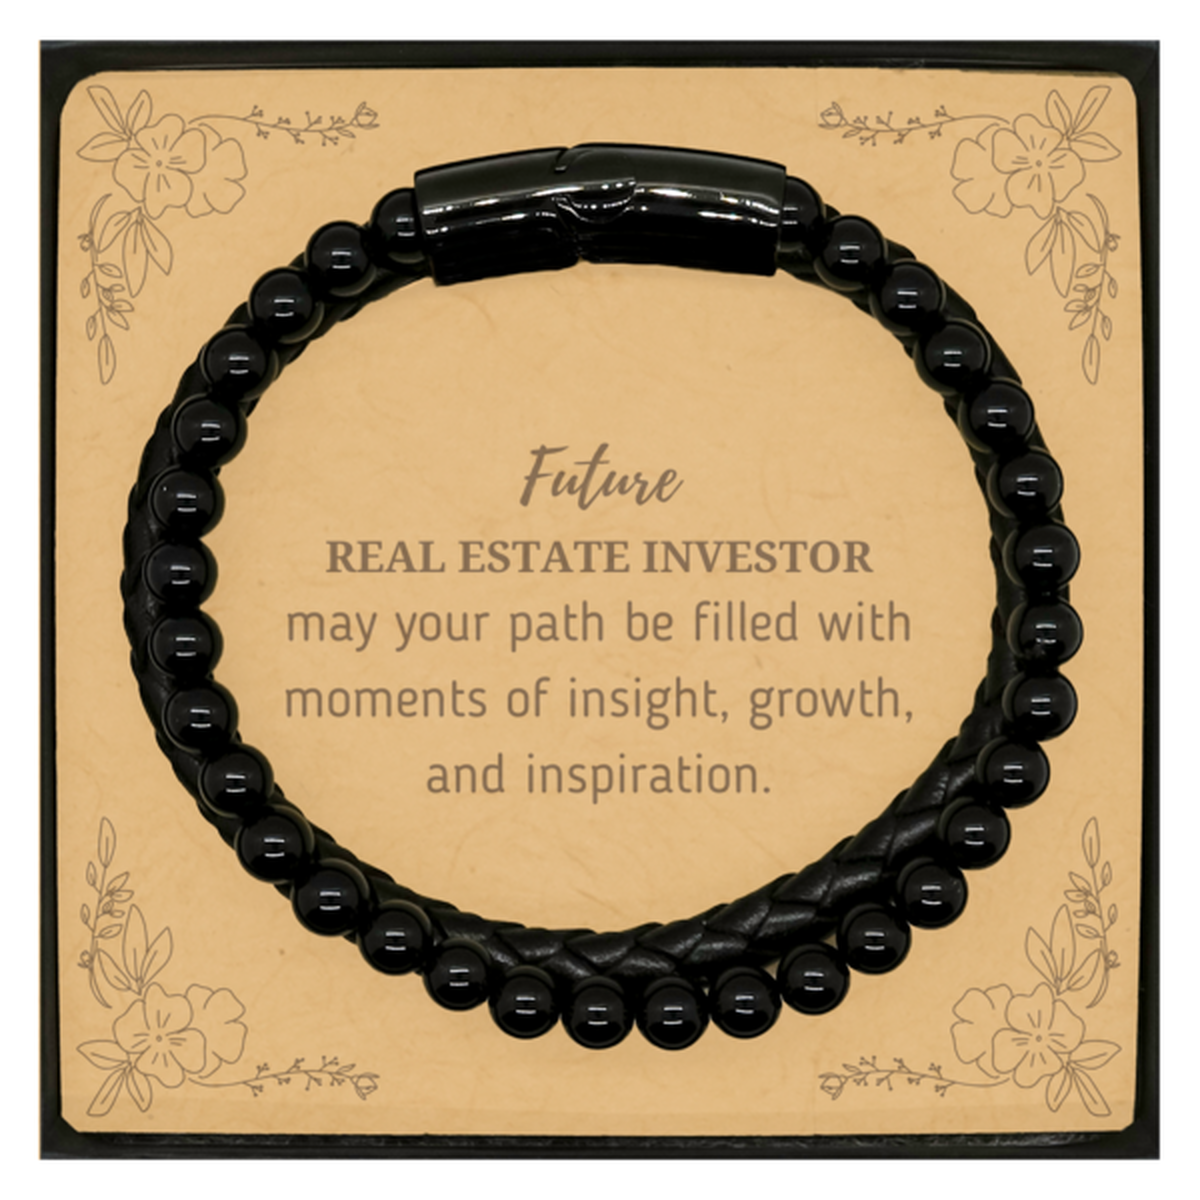 Future Real Estate Investor Gifts, May your path be filled with moments of insight, Graduation Gifts for New Real Estate Investor, Christmas Unique Stone Leather Bracelets For Men, Women, Friends